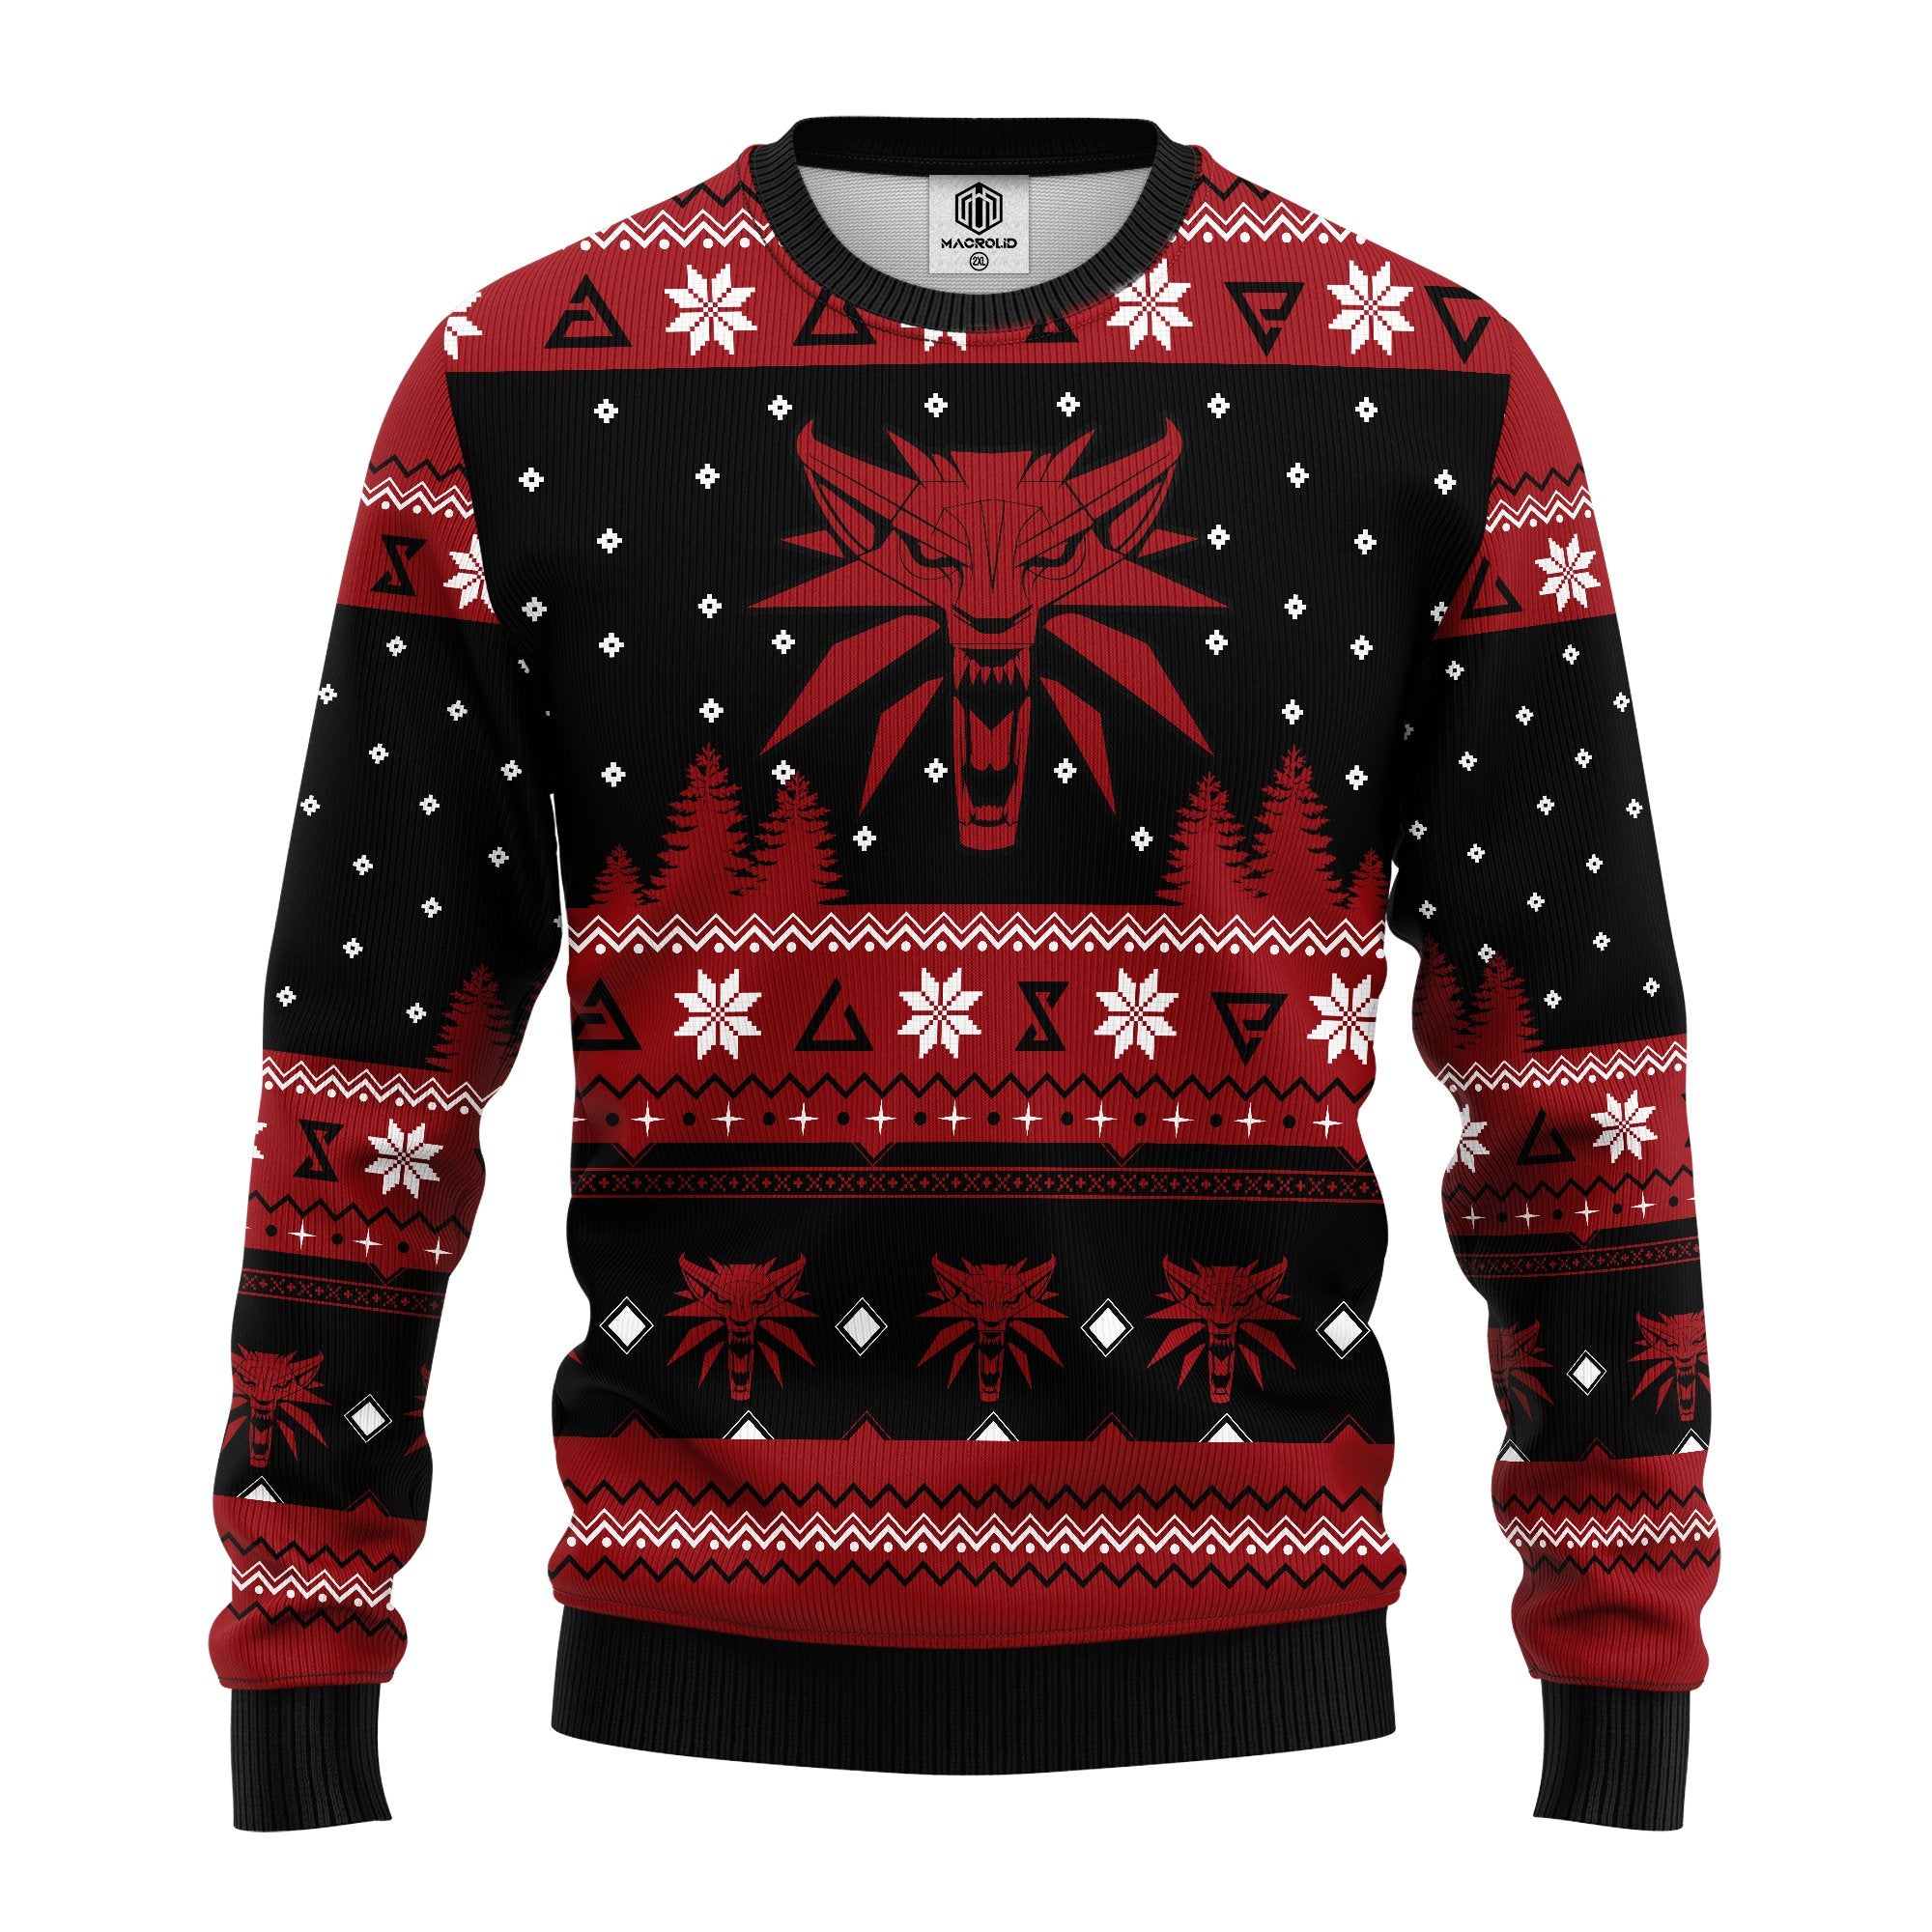 The Witcher Red Ugly Christmas Sweater Amazing Gift Idea Thanksgiving Gift